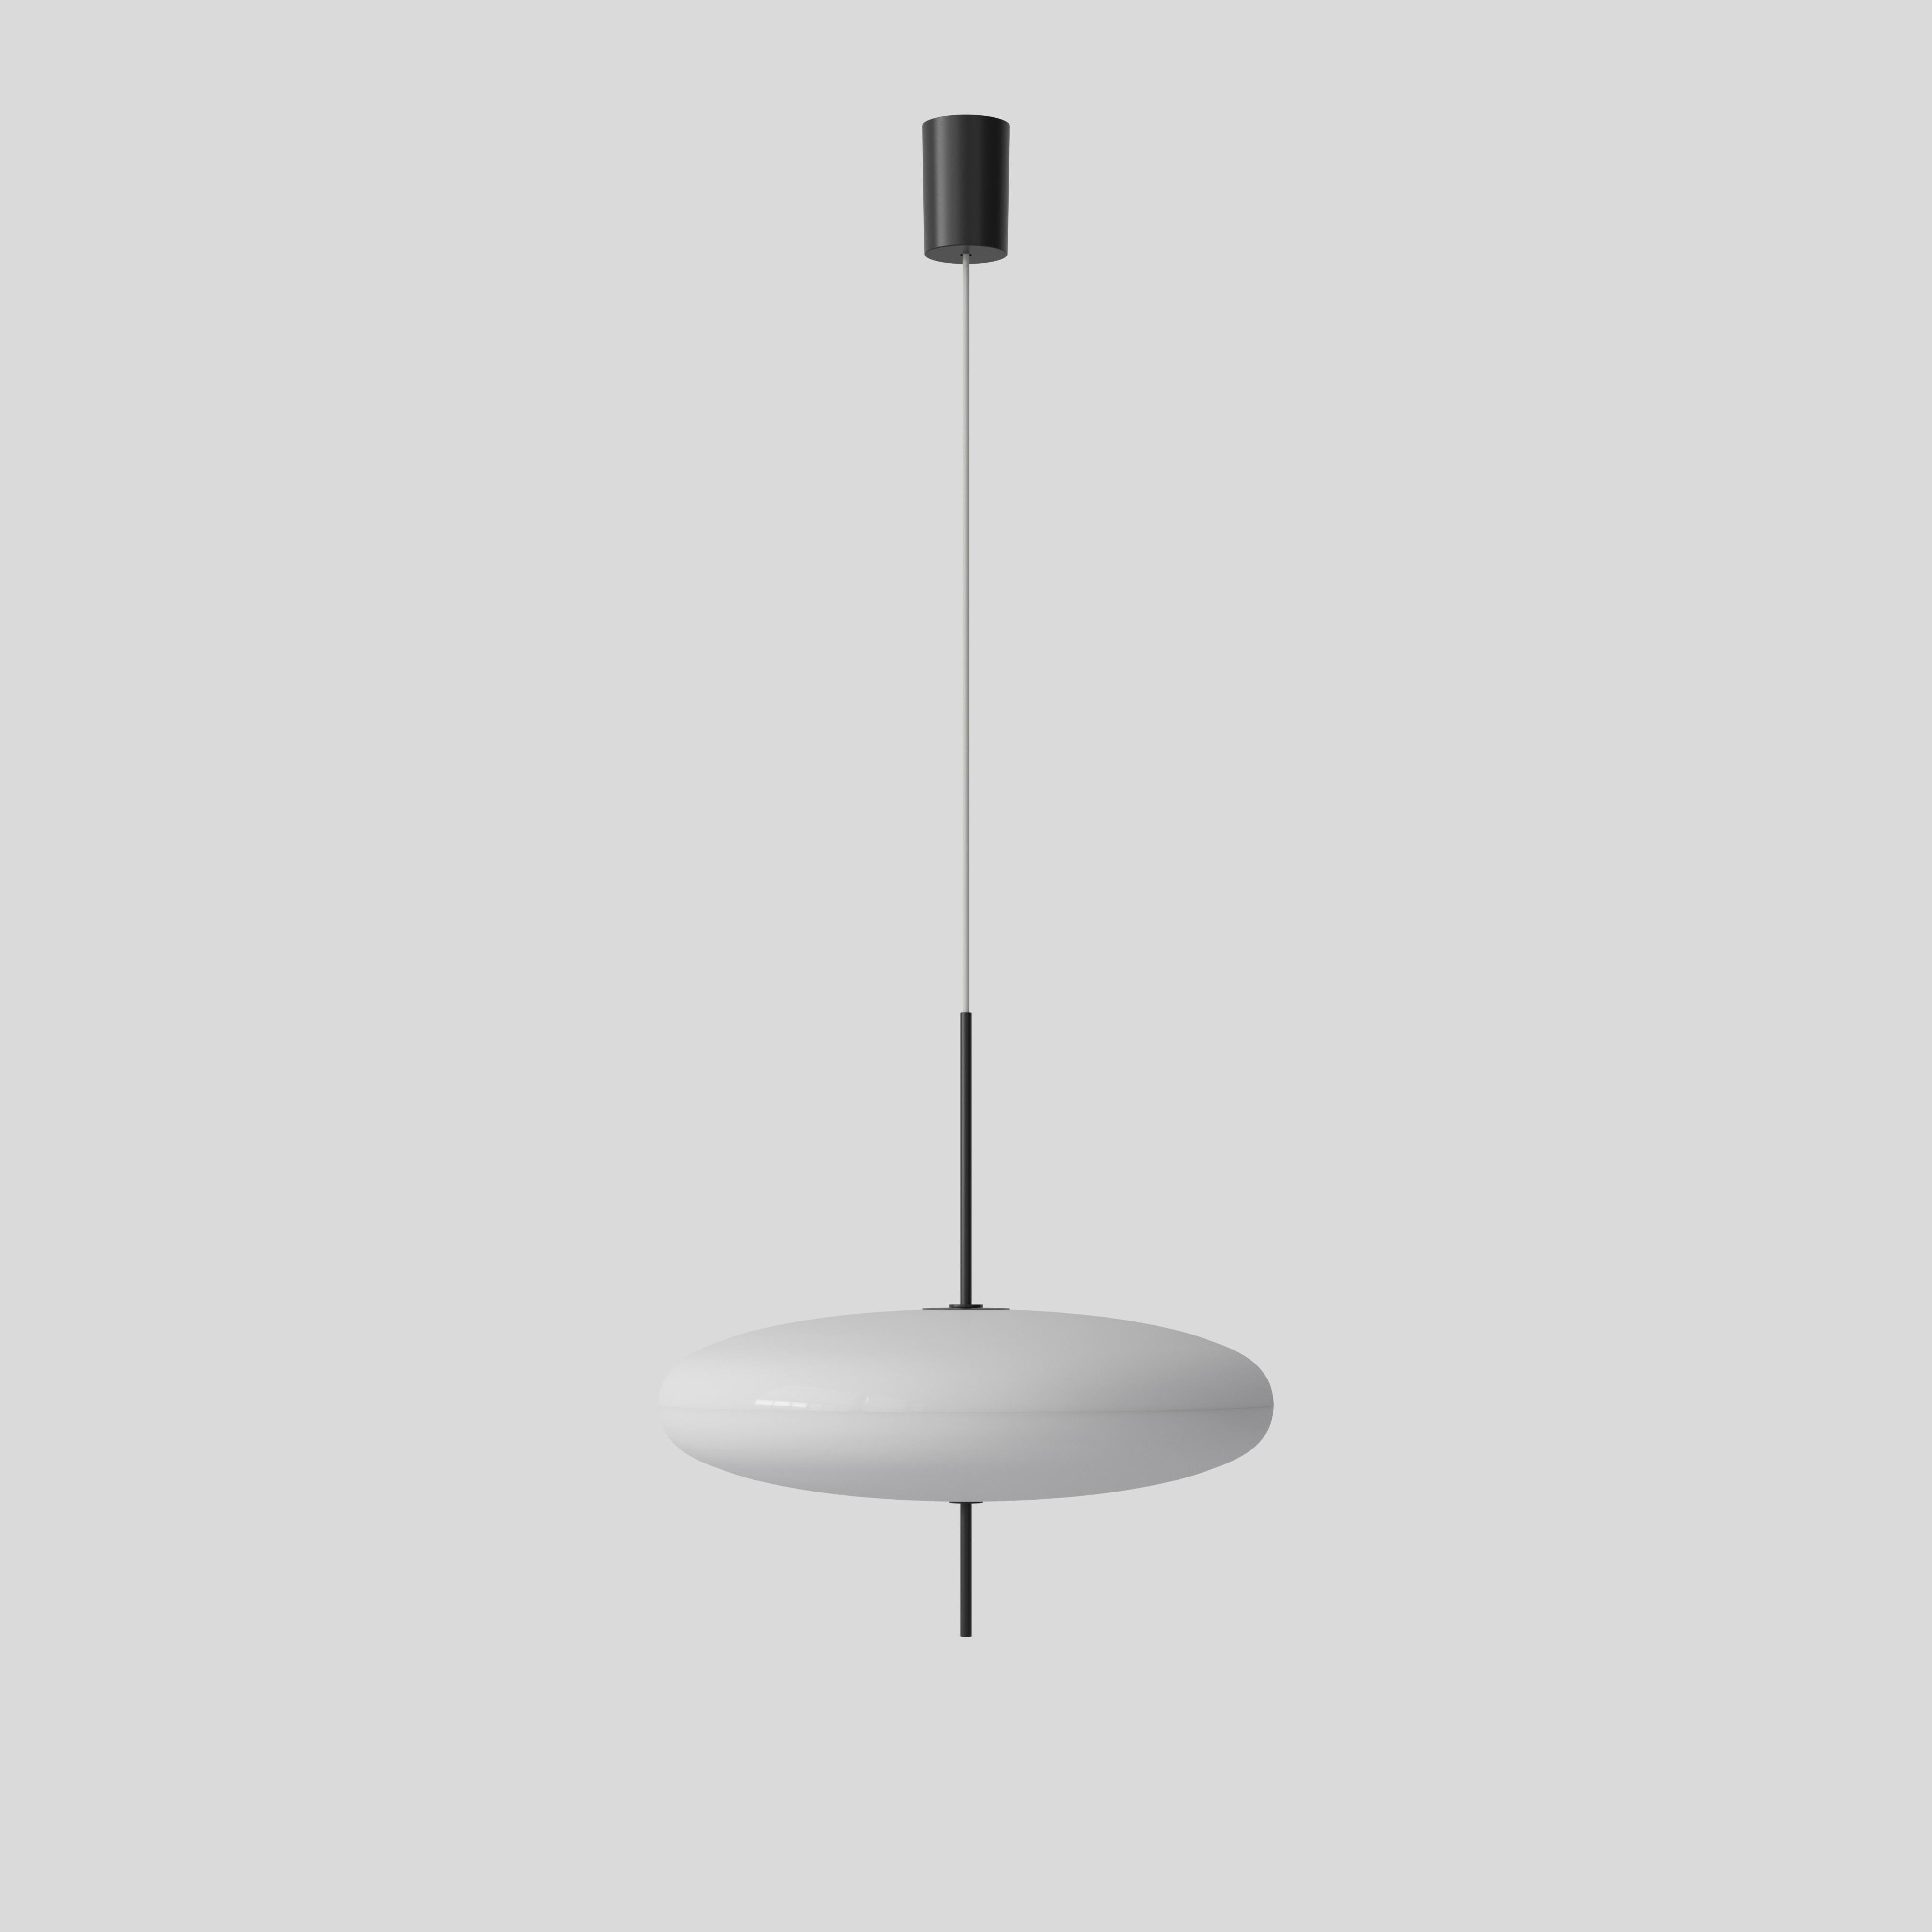 Gino Sarfatti lamp model 2065.
White diffuser, black hardware, white cable.
Manufactured by Astep

Model 2065
Design by Gino Sarfatti
The 2065 is made of two joined opaline methacrylate saucer-shaped diffusers suspended from the ceiling with a